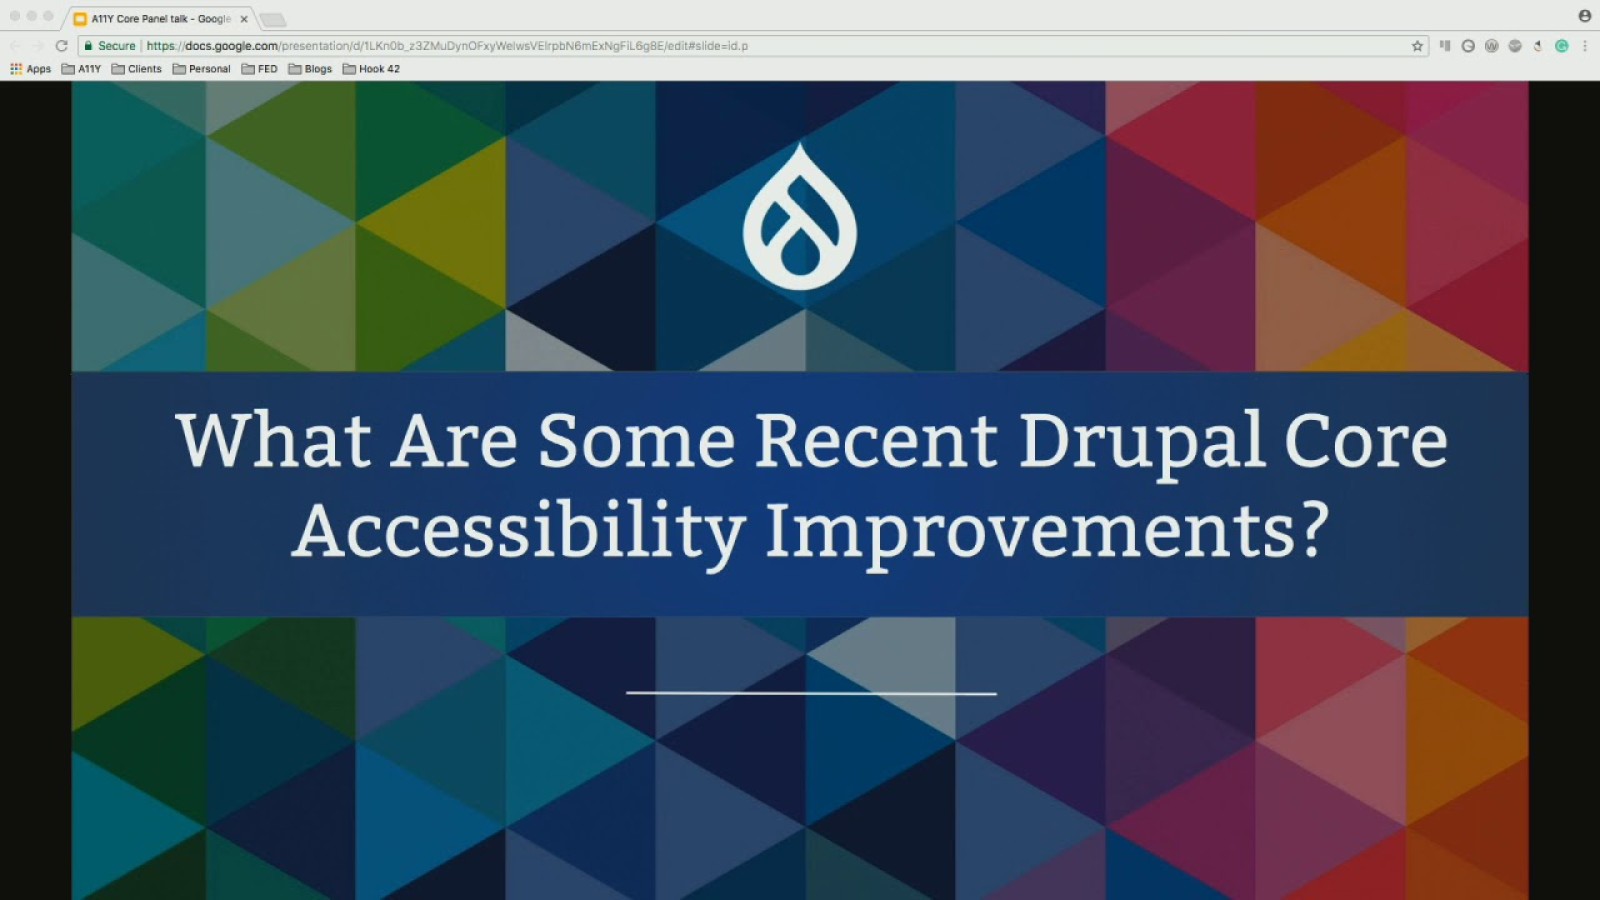 Core Accessibility: Building Inclusivity into the Drupal Project